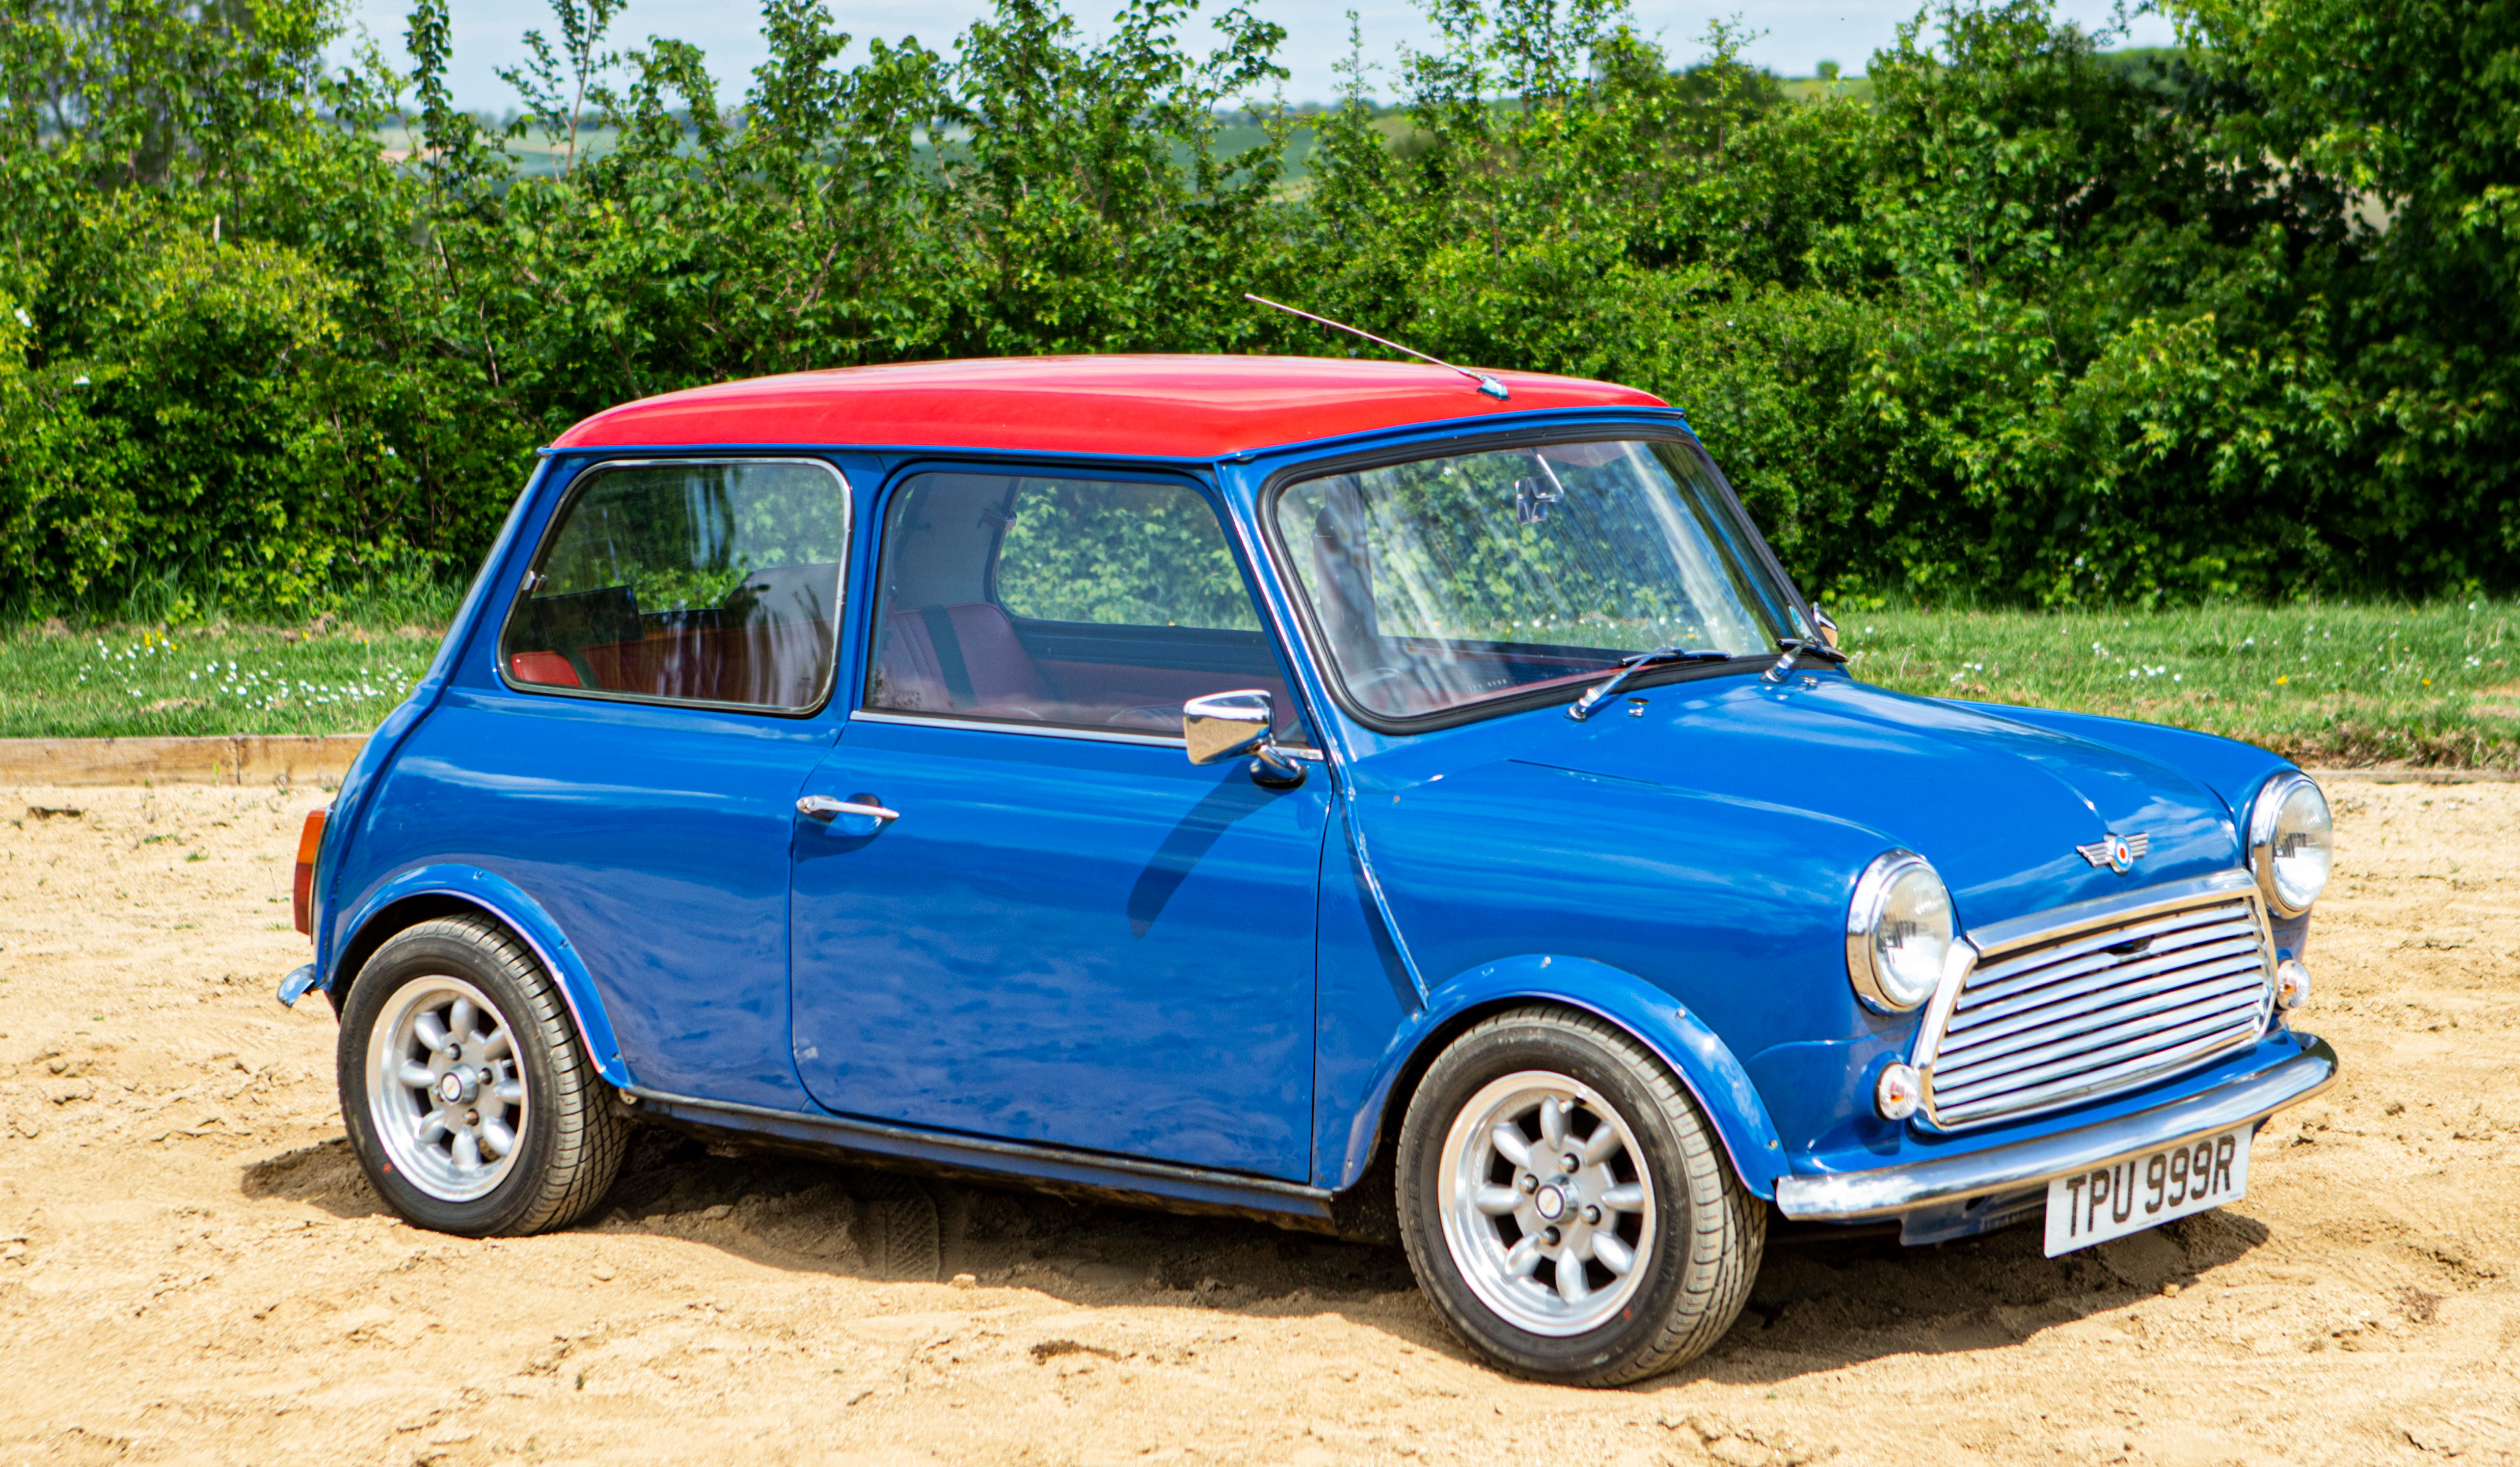 1963 Austin MINI Cooper technical and mechanical specifications